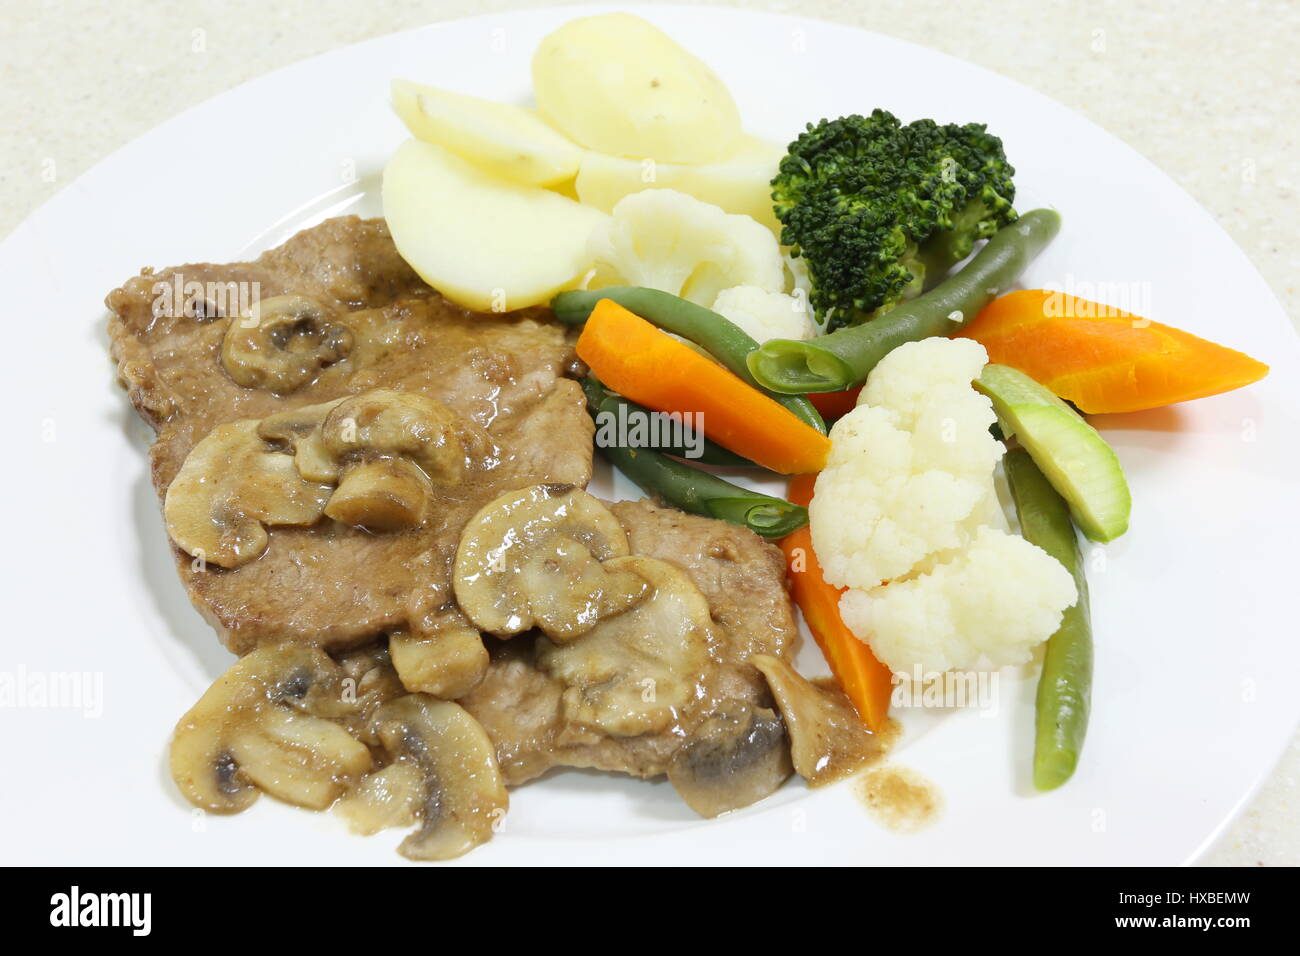 Roast beef with a mushroom gravy, served with boiled potatoes and steamed vegetables. Stock Photo